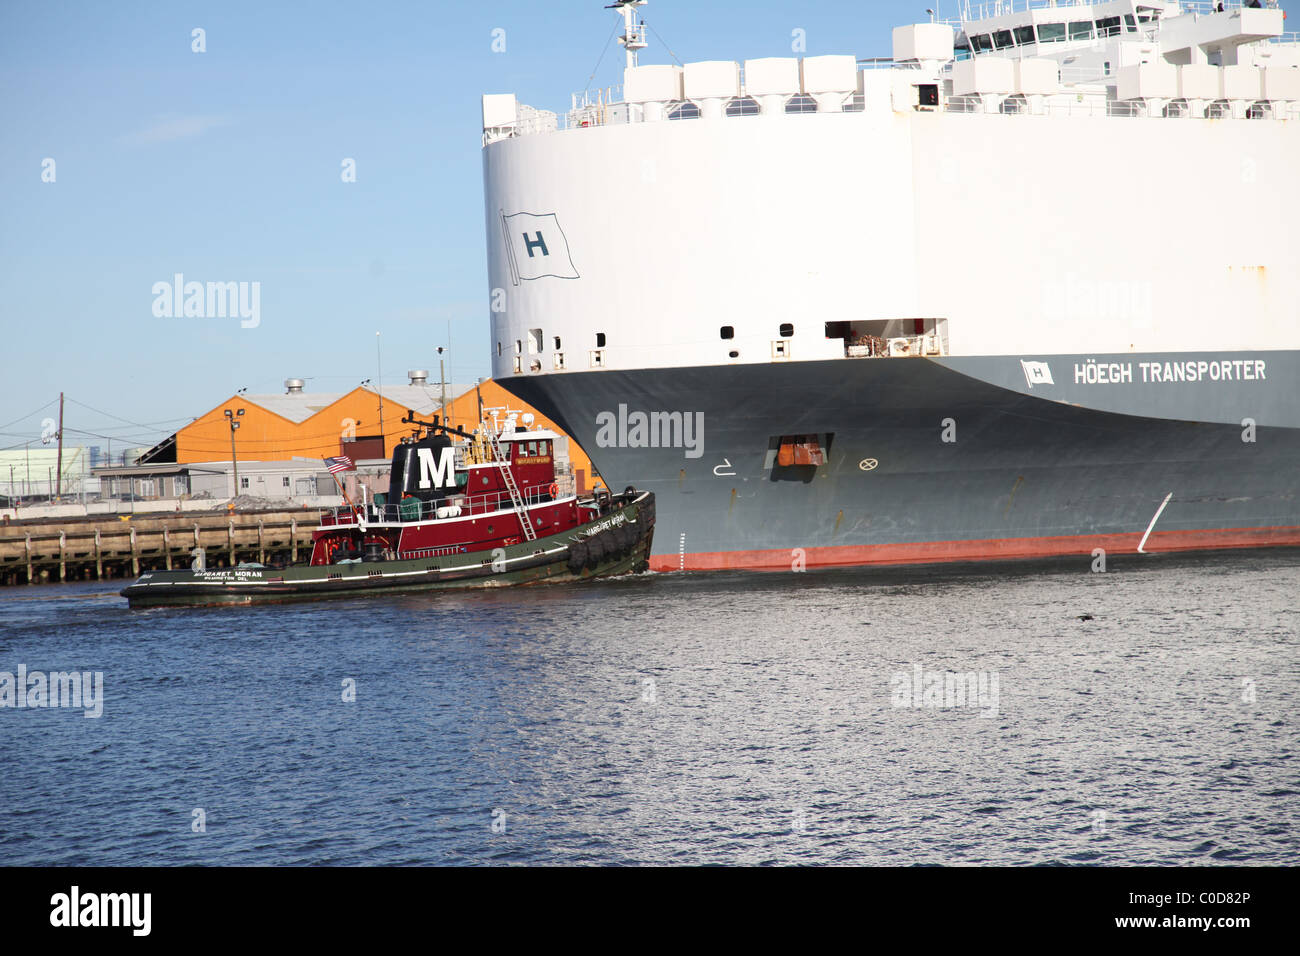 Tugboat Moran at Port Newark, NJ USA, United States of America pushing Hoegh Transporter Autoliner out to Atlantic Ocean Stock Photo